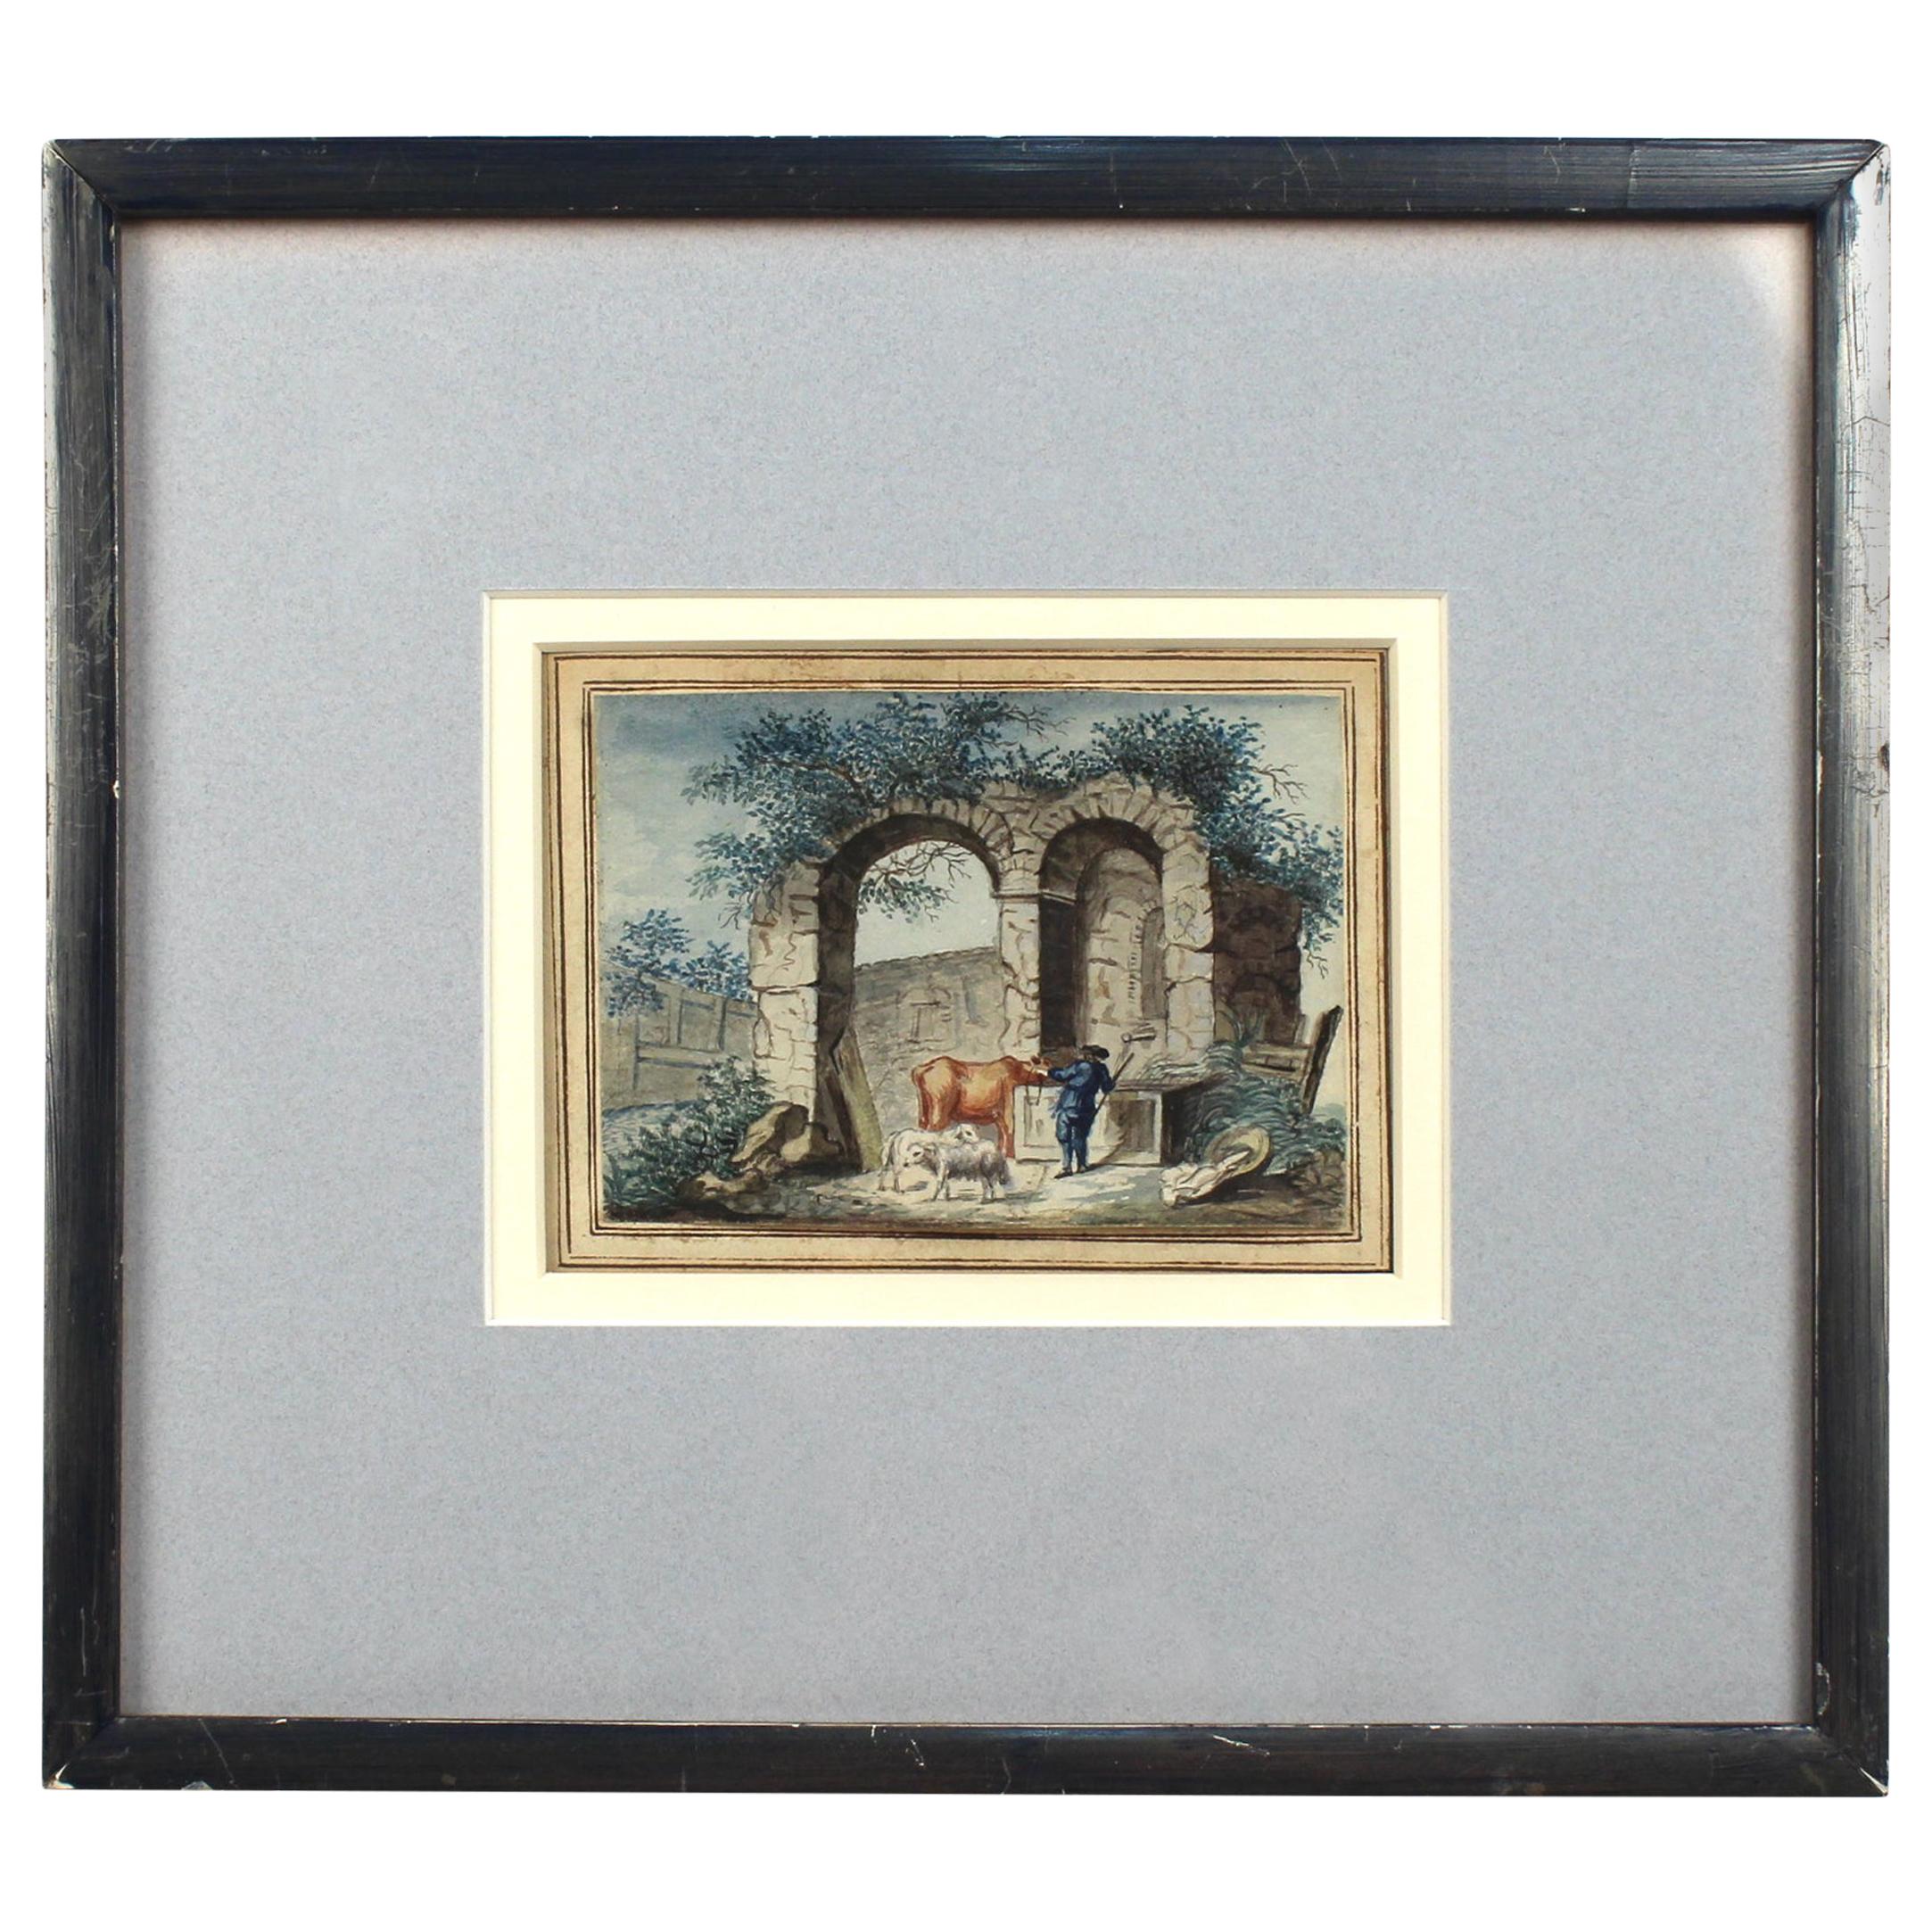 Antique Late 18th-Early 19th Century English Watercolor Painting of Ruins